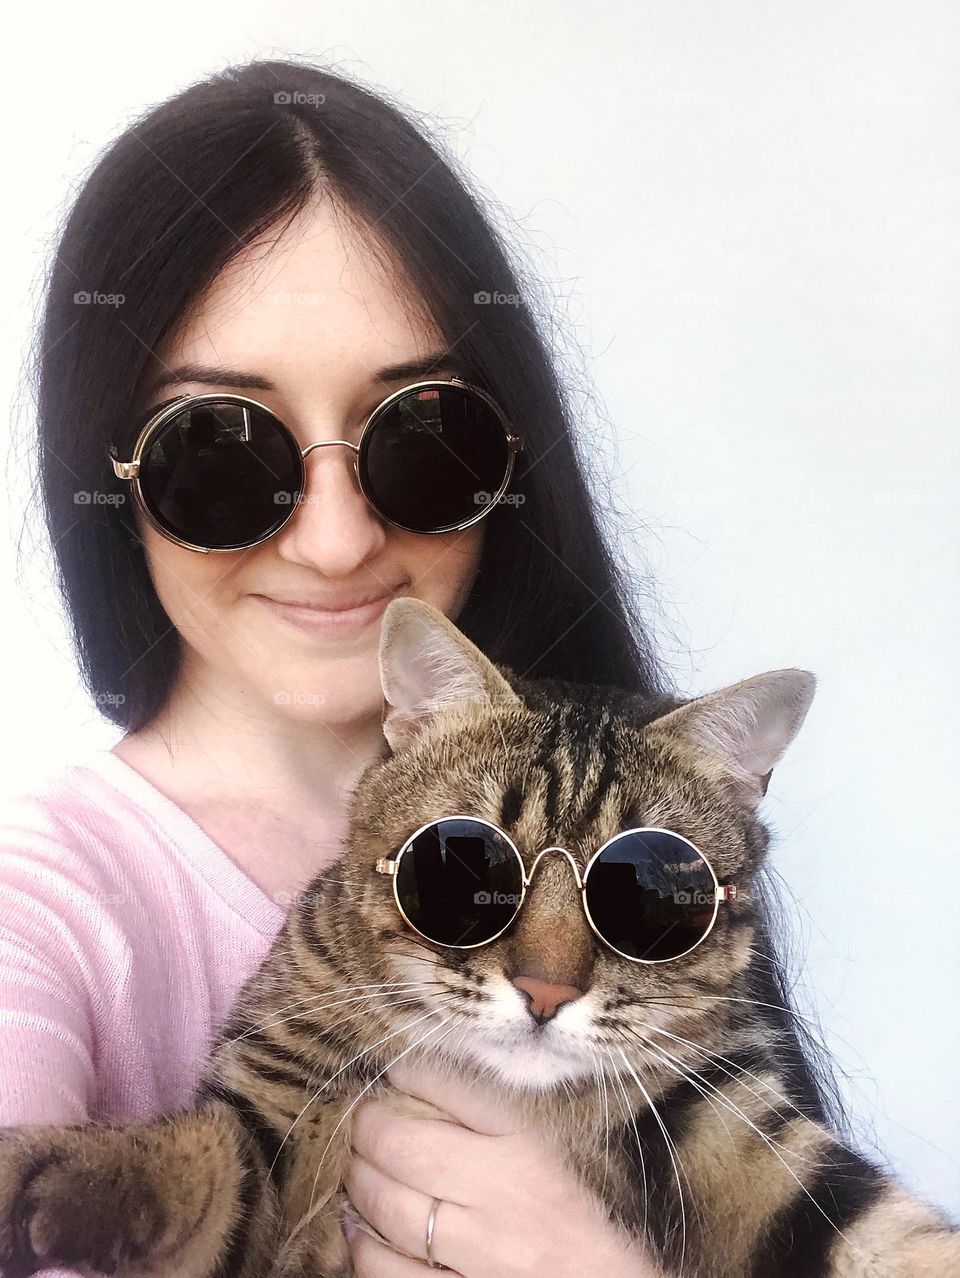 Funny selfie photo. Girl with cat on glasses